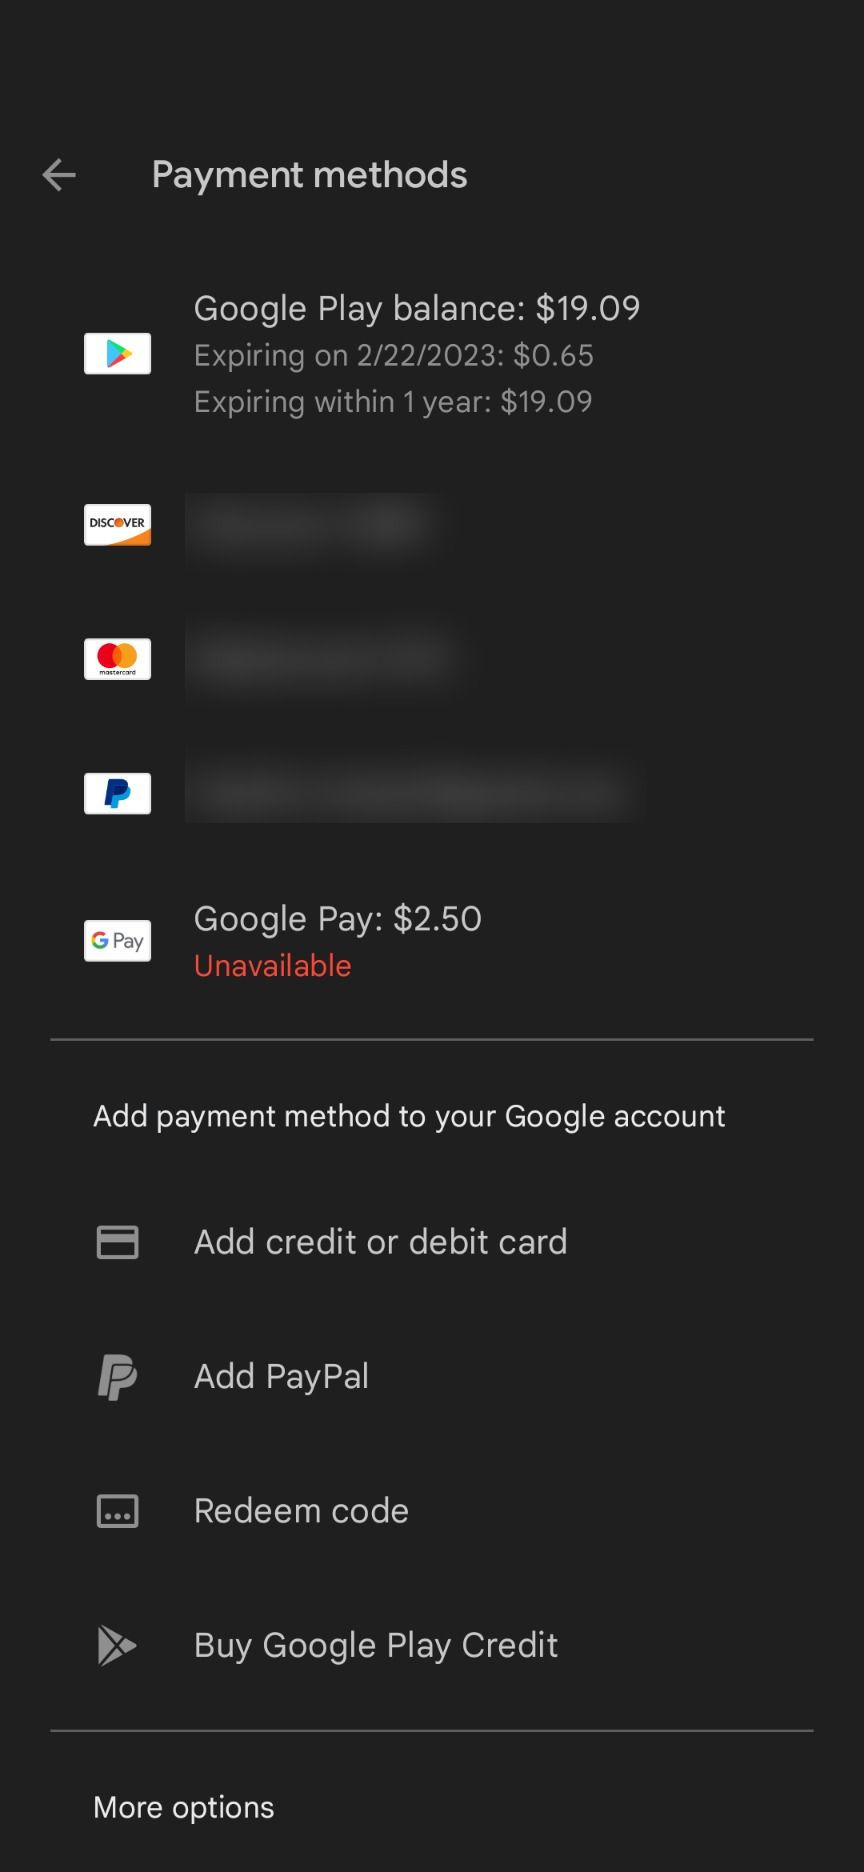 I pill off the code on my google play gift card - Google Play Community